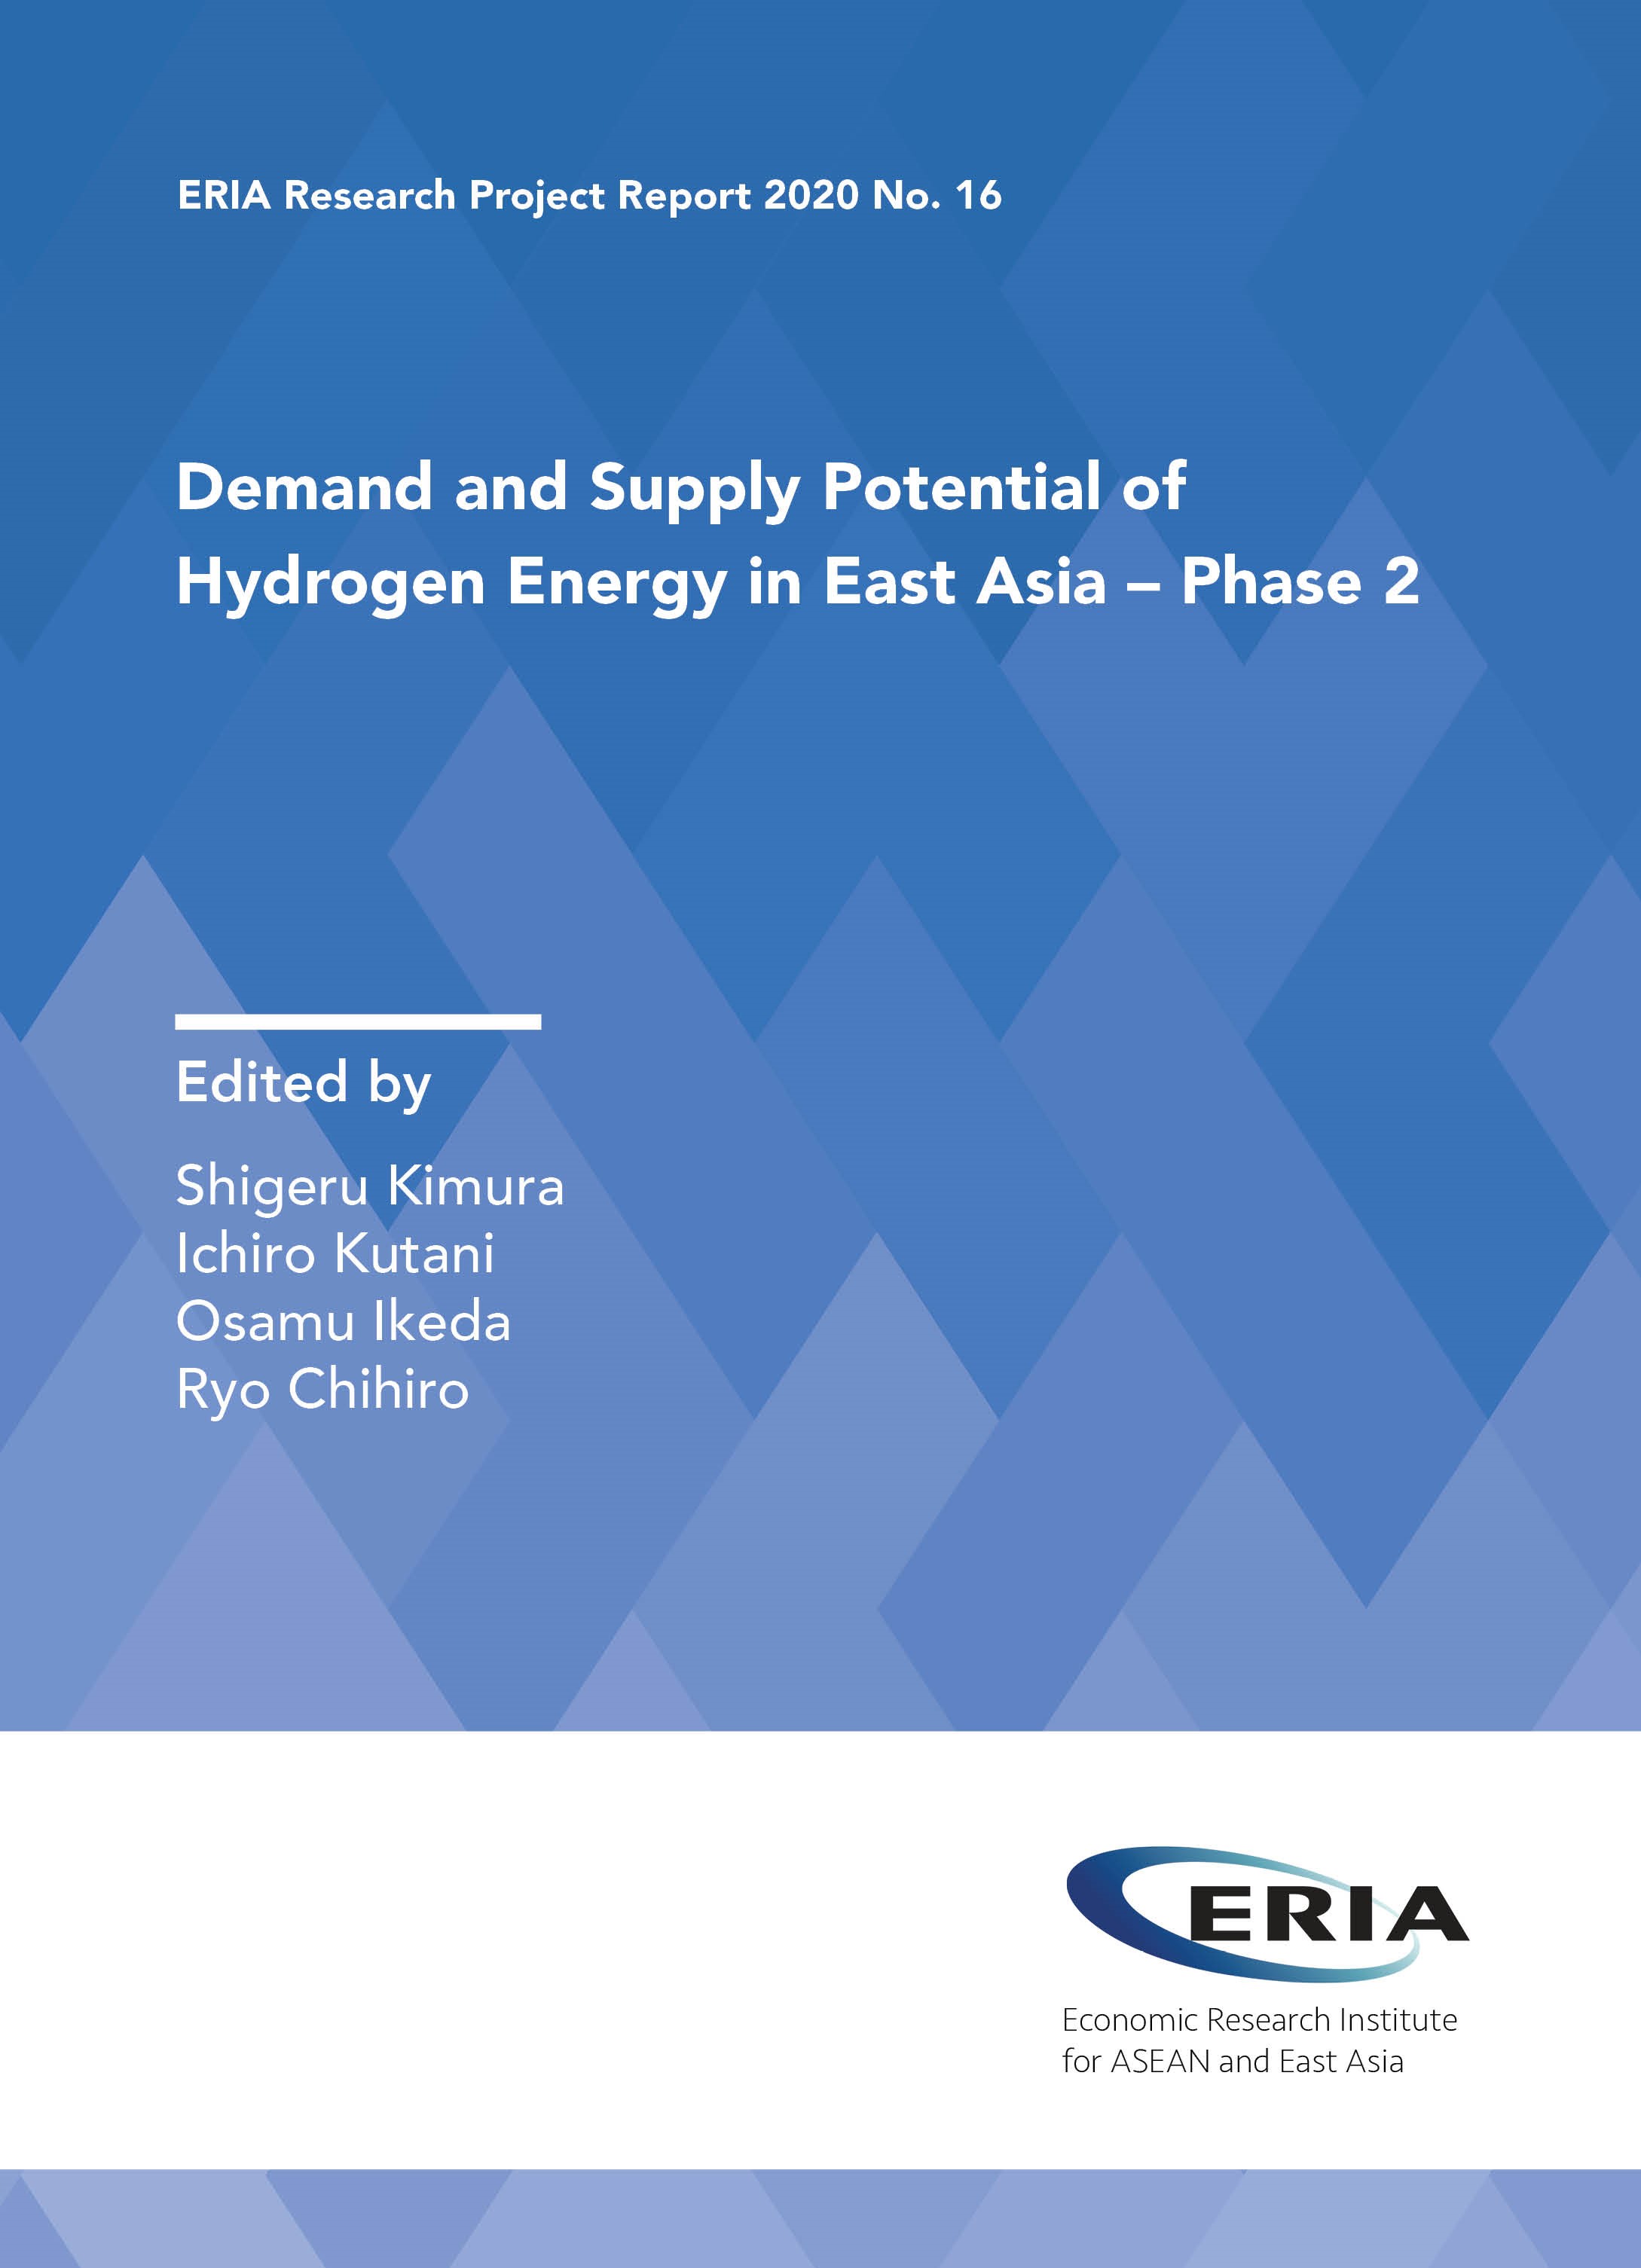 Demand and Supply Potential of Hydrogen Energy in East Asia - Phase 2